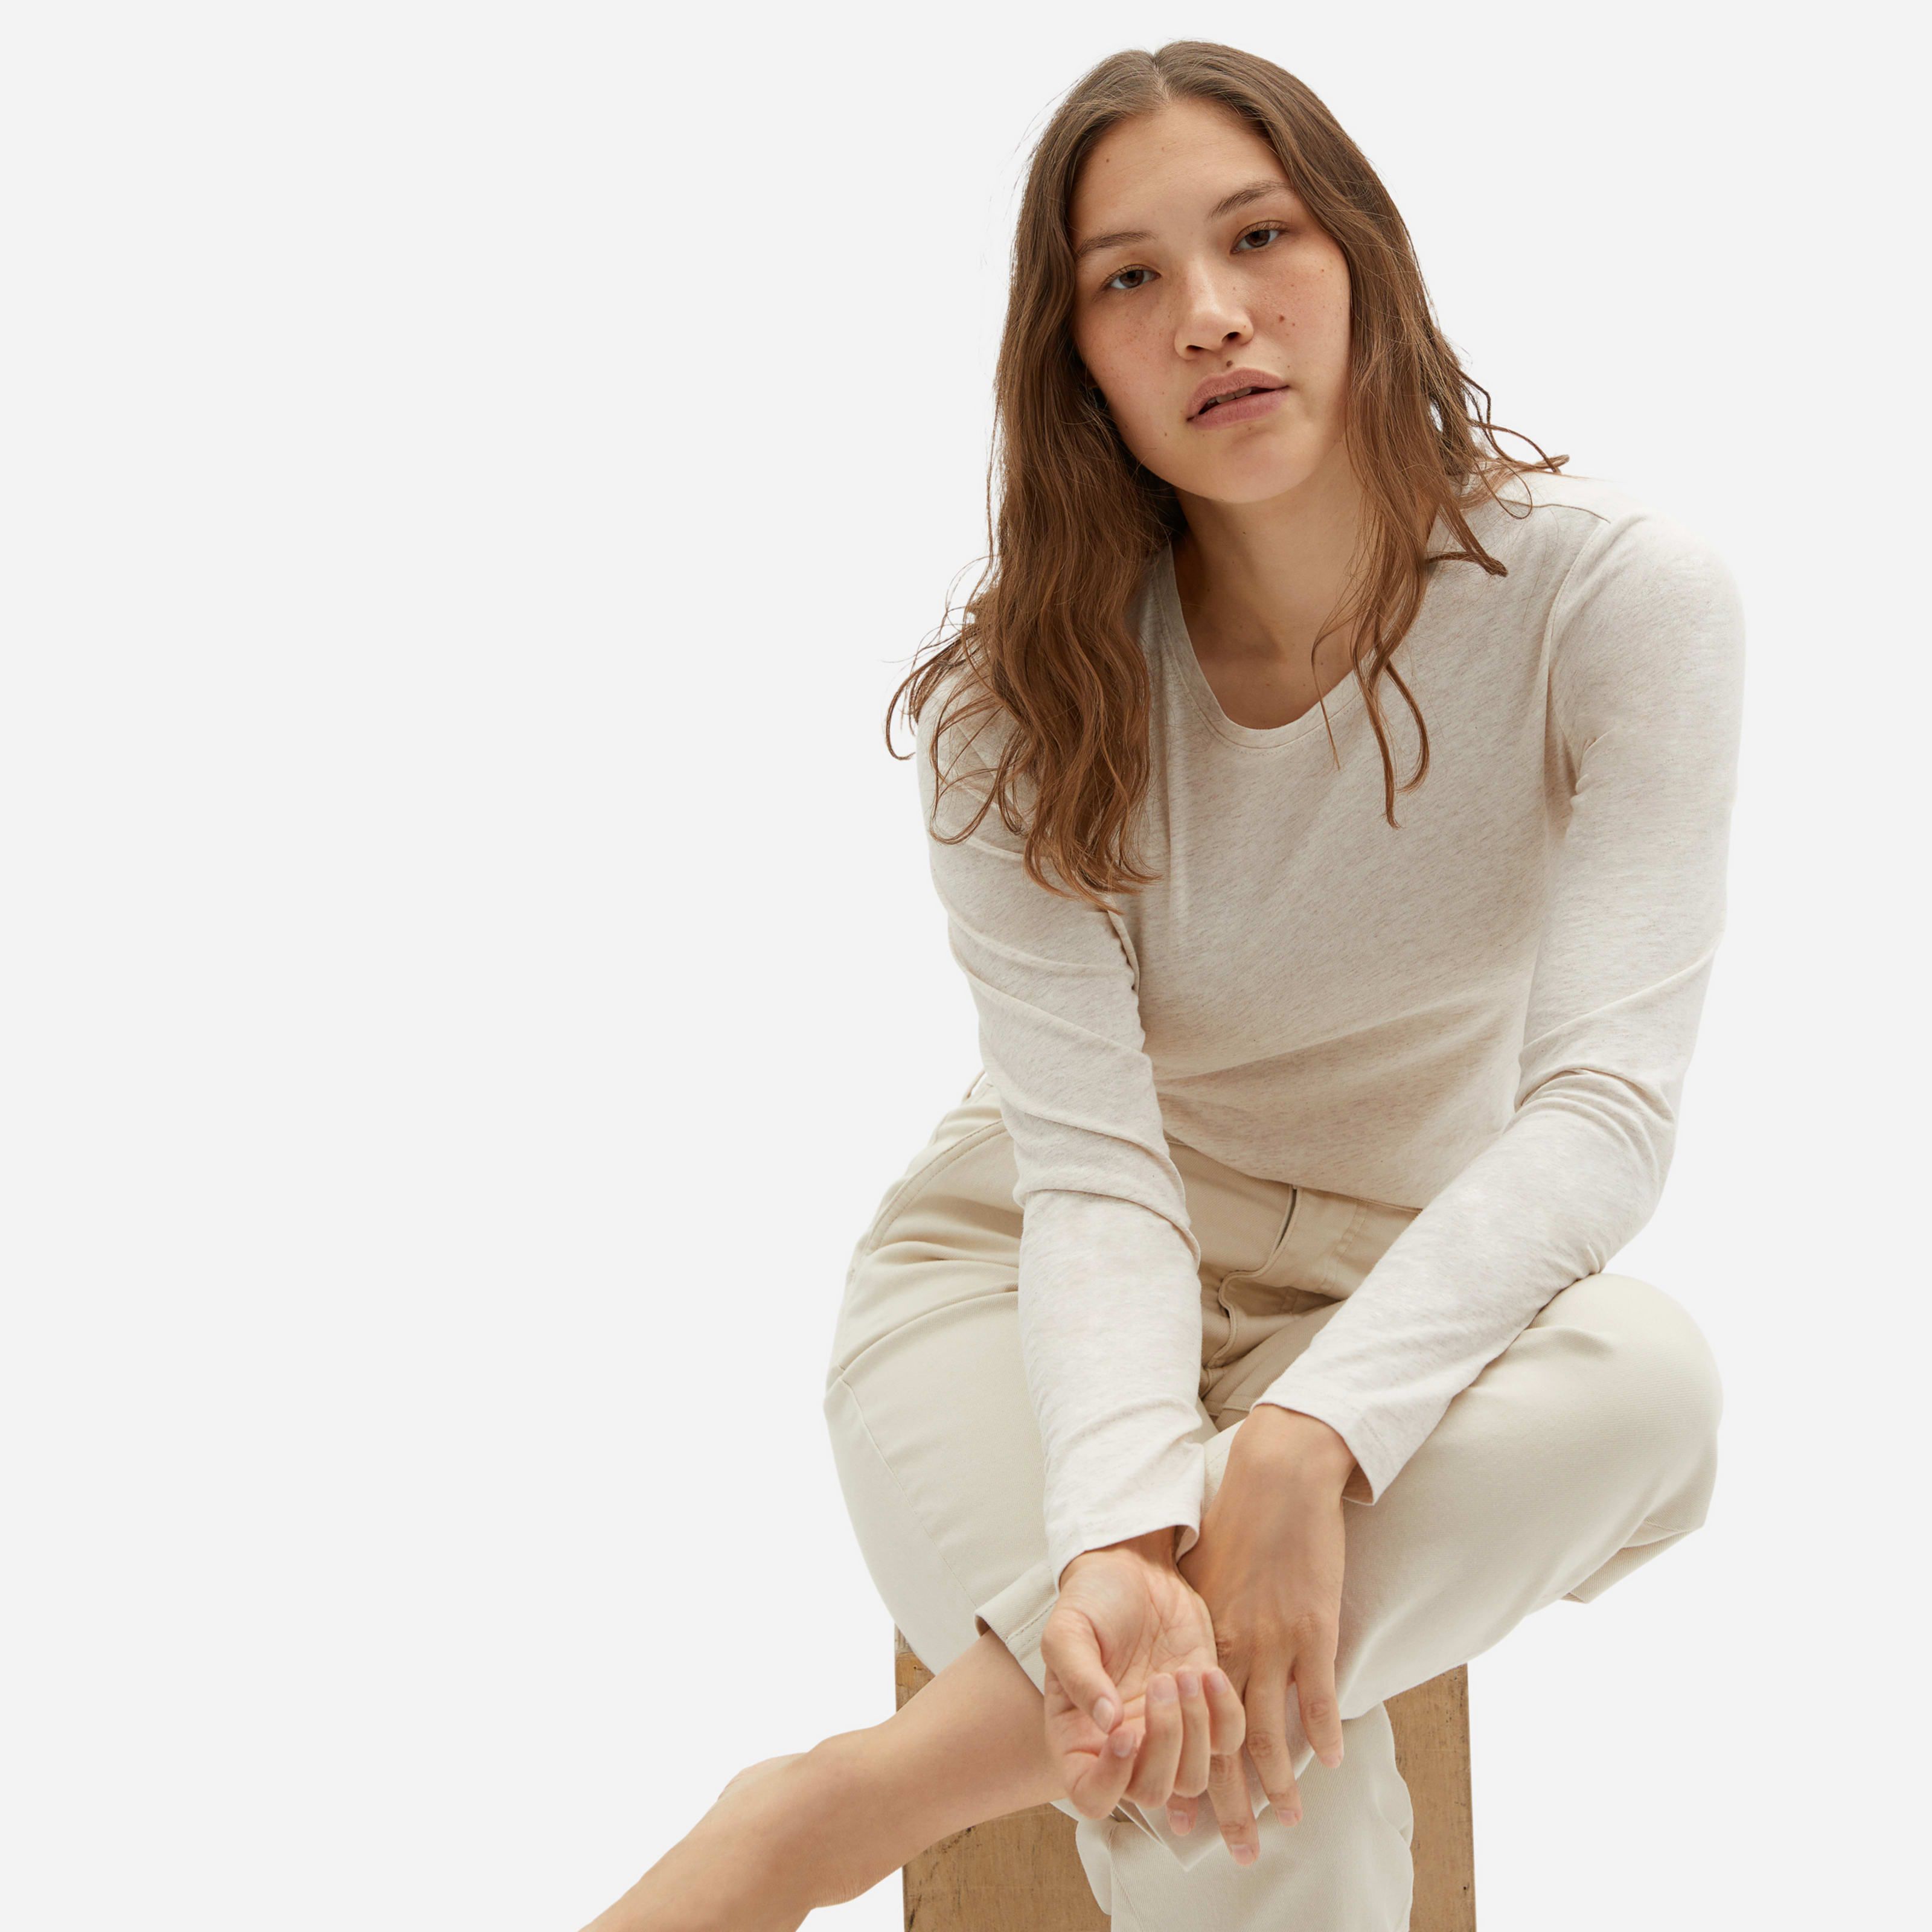 Women's Organic Cotton Long-Sleeve Crew Sweater by Everlane in Oatmeal, Size XS | Everlane